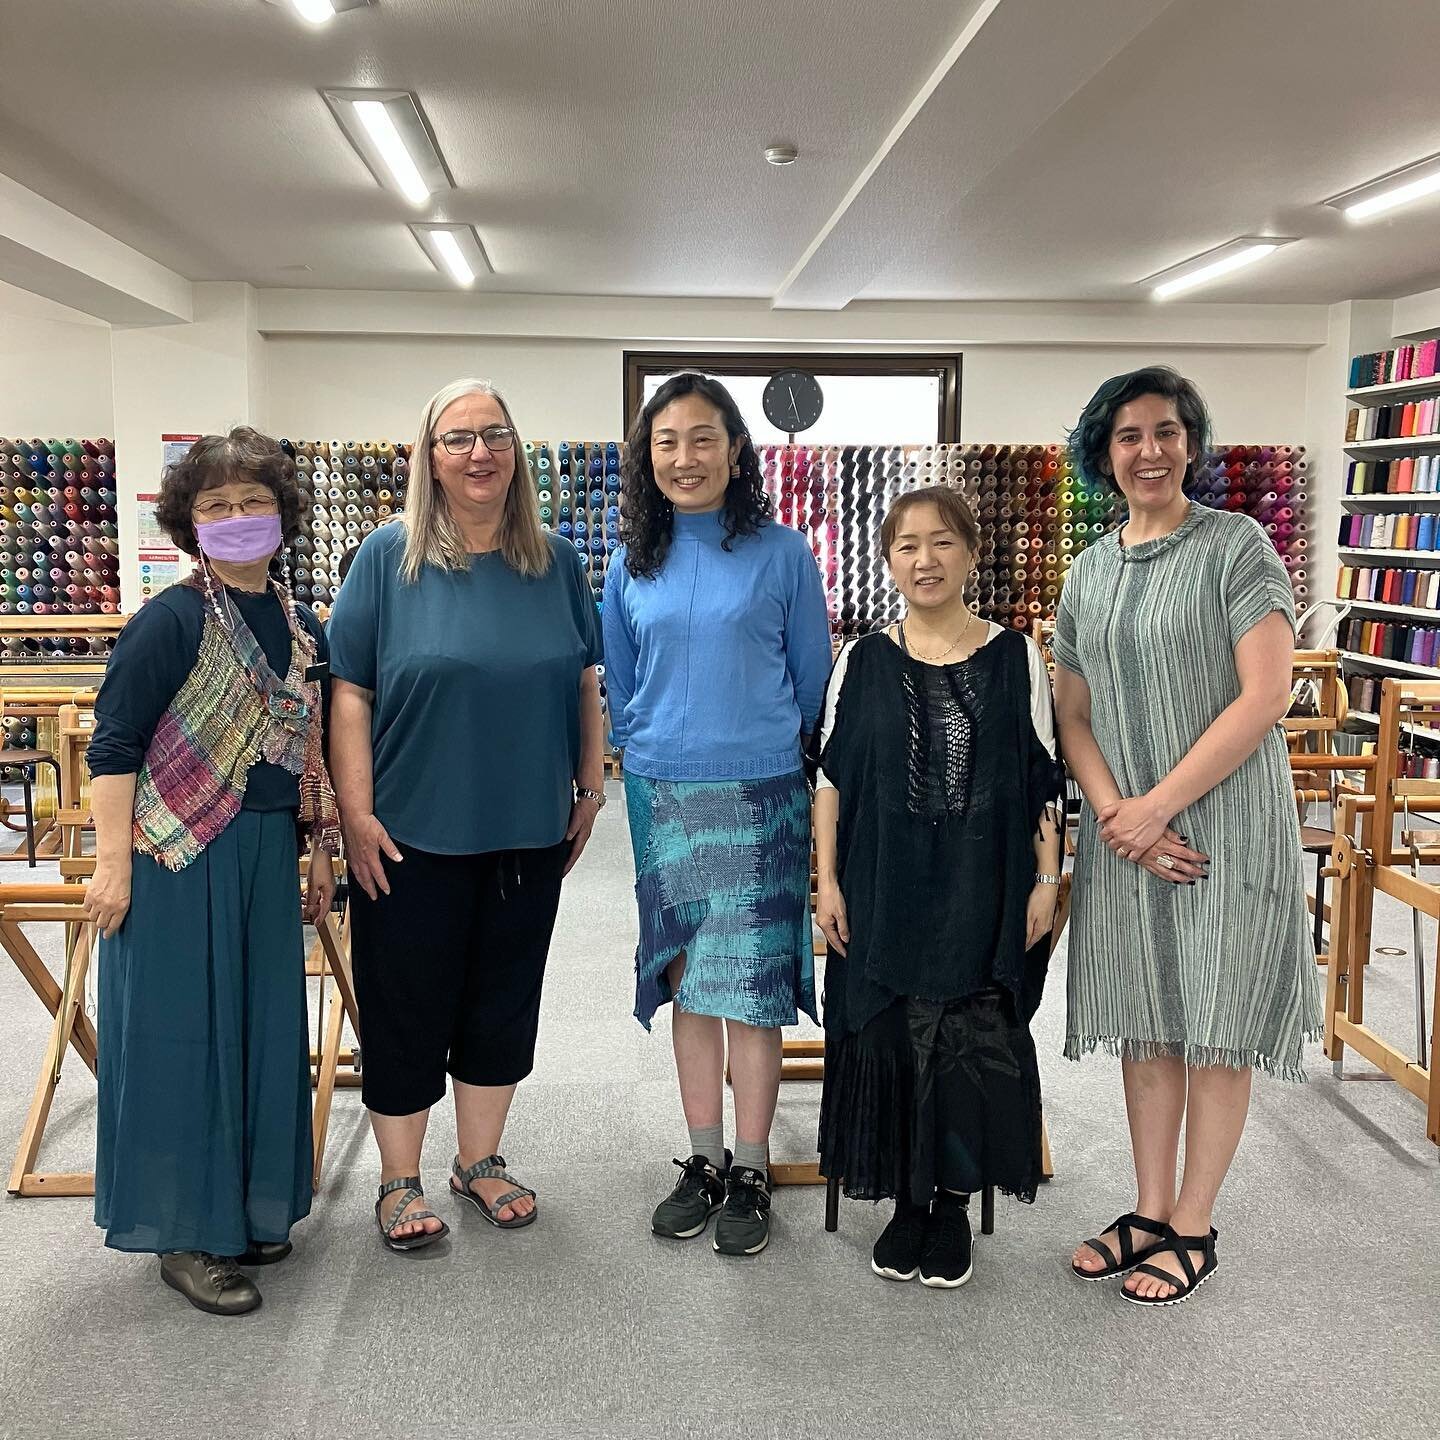 [Japan Tour] A full day with SAORI &amp; Bengala dye in Osaka. It was a great pleasure to reconnect with SAORI friends and people whom we got together in person first time. The focus of my tour is making friends through SAORI. We finished the day wit